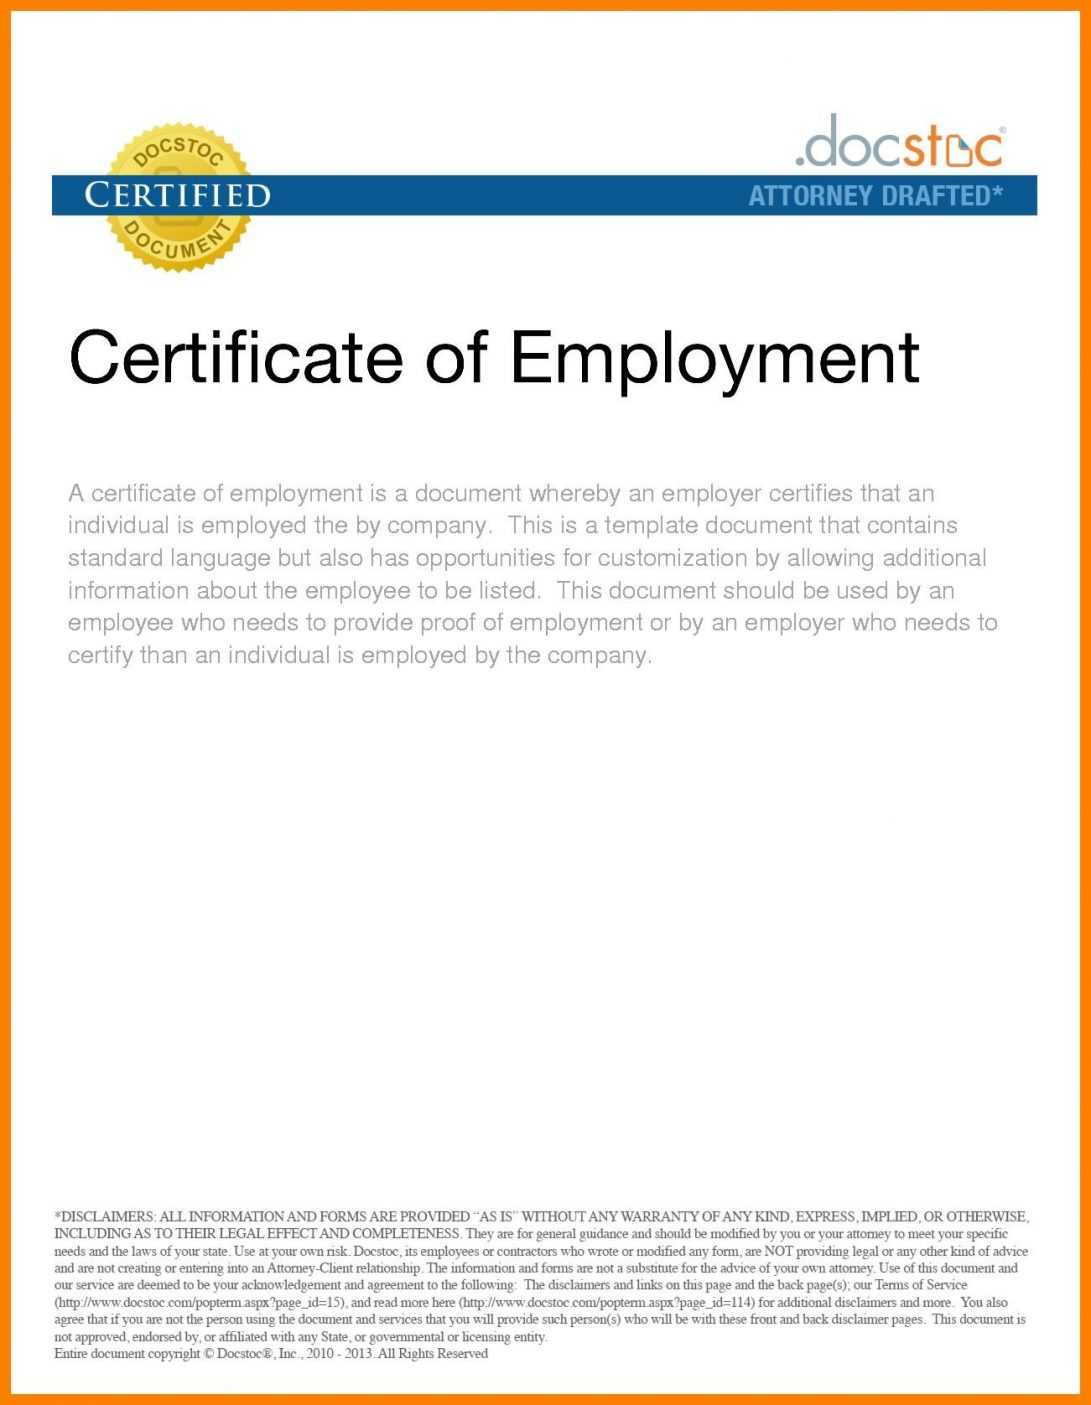 016 Sample Certificate Of Employment Certificates Stunning Throughout Sample Certificate Employment Template